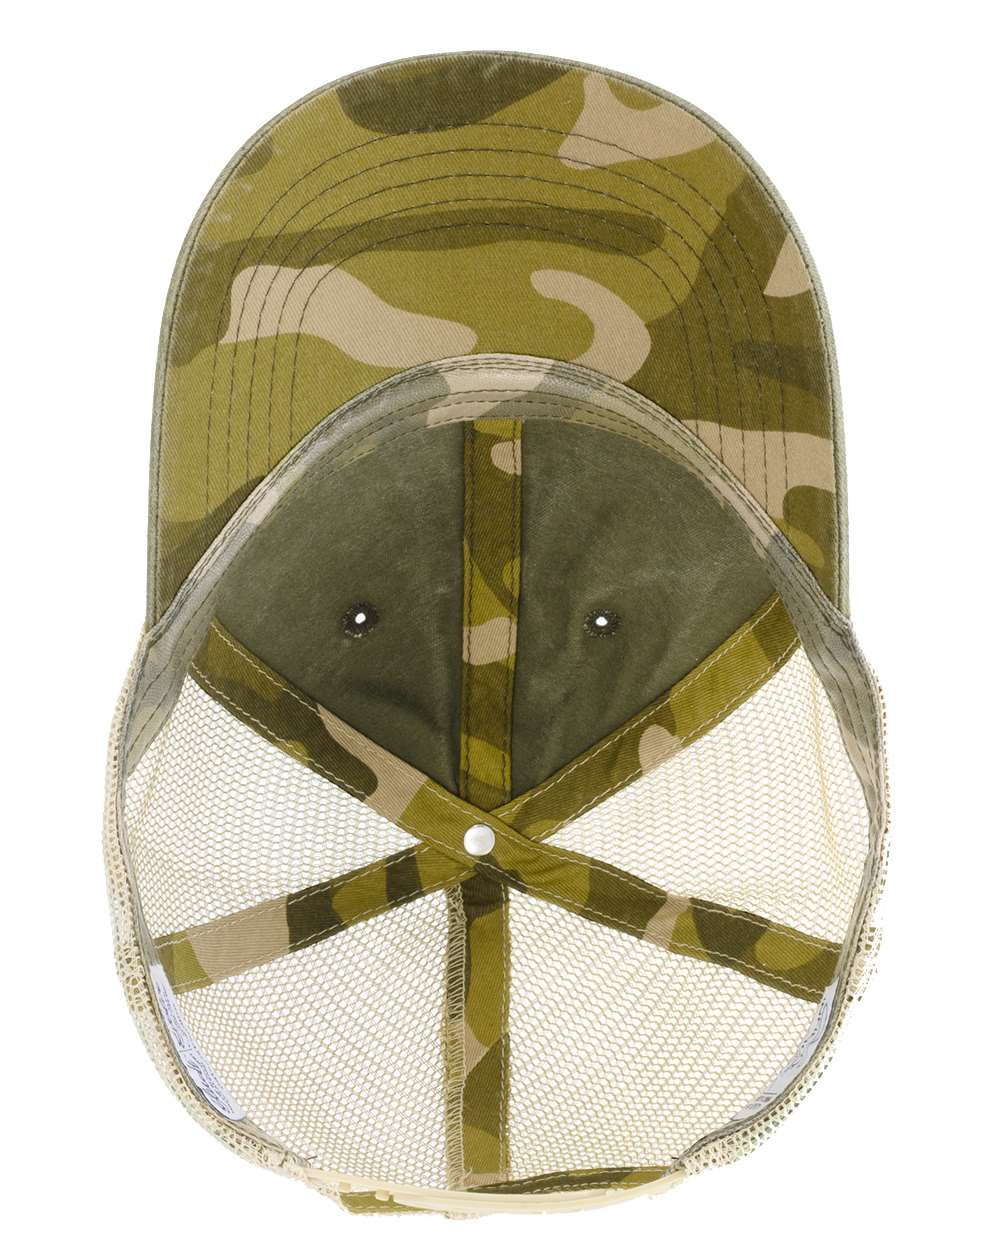 Image of the Kelly Hughes Band Olive/Camo Ponytail Cap, featuring a trendy camouflage pattern with an olive-colored ponytail opening, perfect for blending style with function in urban or outdoor settings.